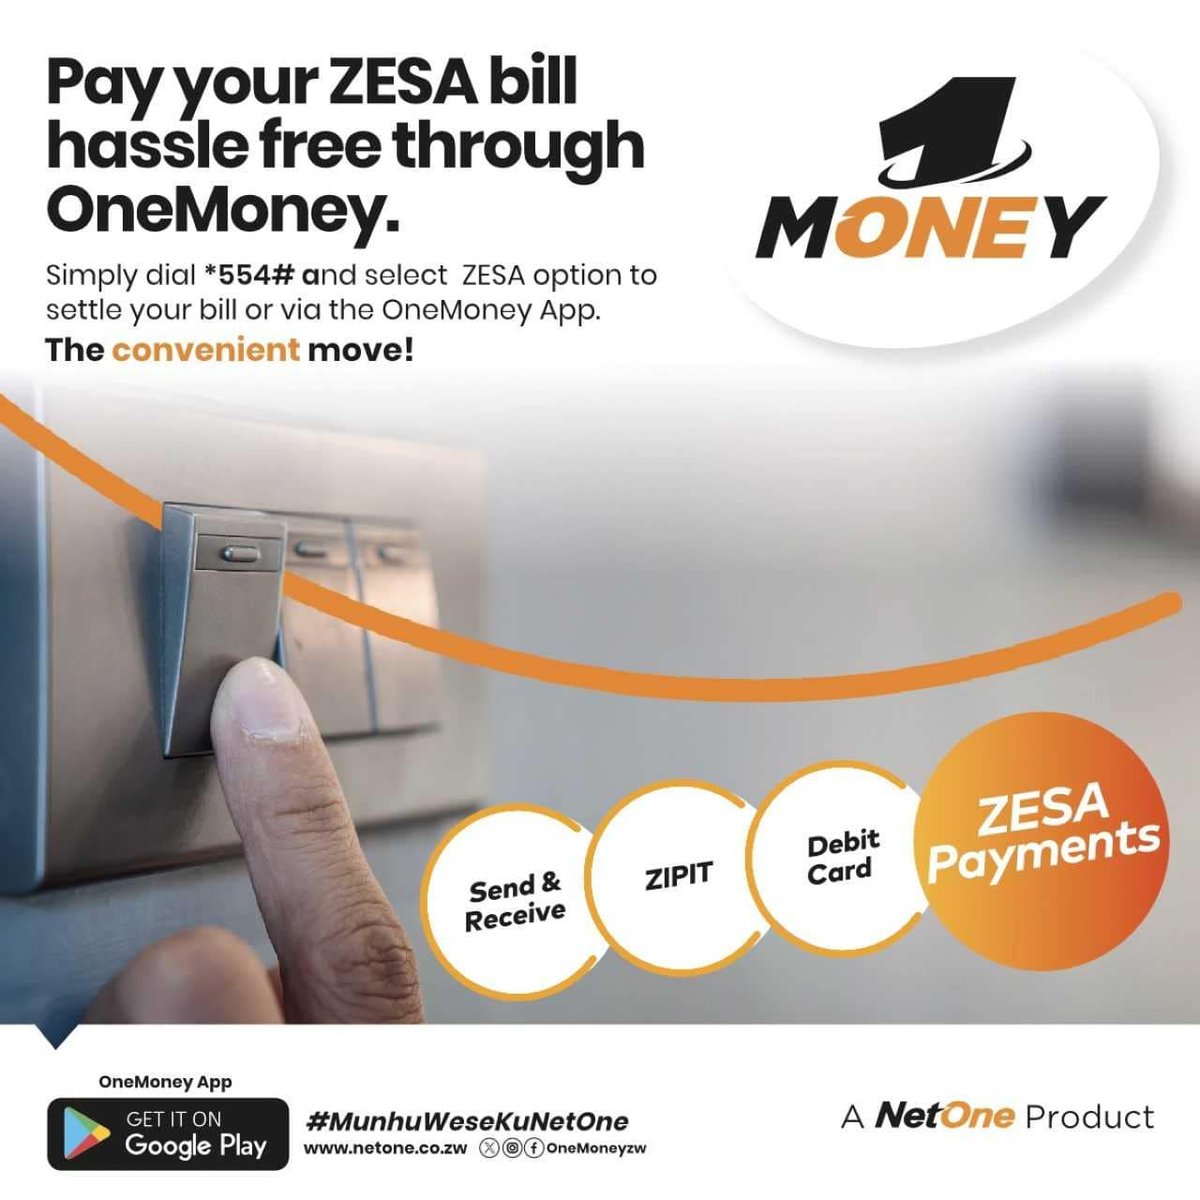 Say goodbye to ZESA payment hassles! Experience the convenience of OneMoney. Dial *554# and select ZESA option to settle your bill or via the OneMoney App. #OneMoney #TheConvenienceMove